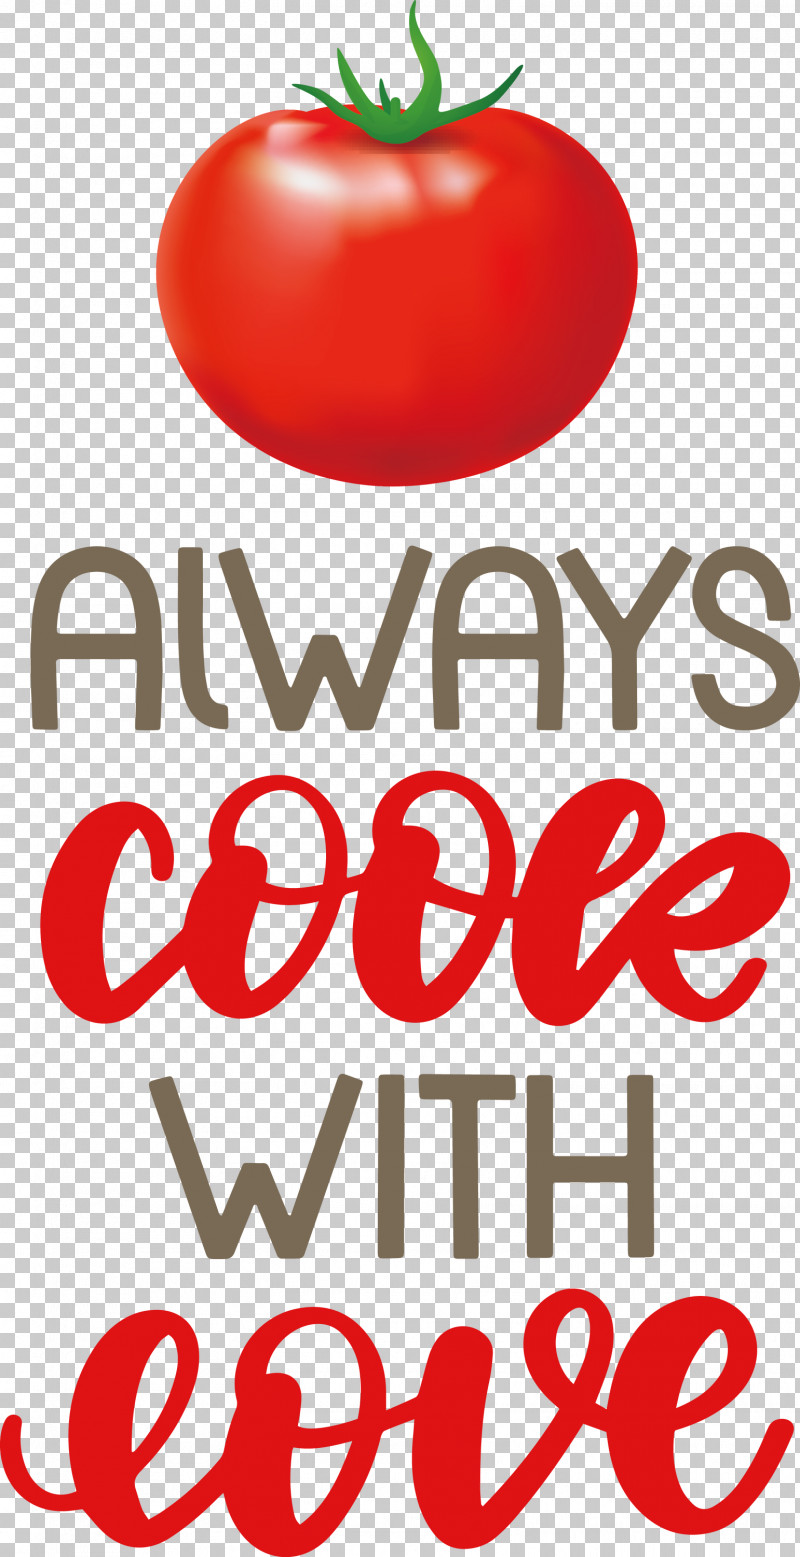 Always Cook With Love Food Kitchen PNG, Clipart, Candy, Chocolate, Cook, Cooking, Dessert Free PNG Download